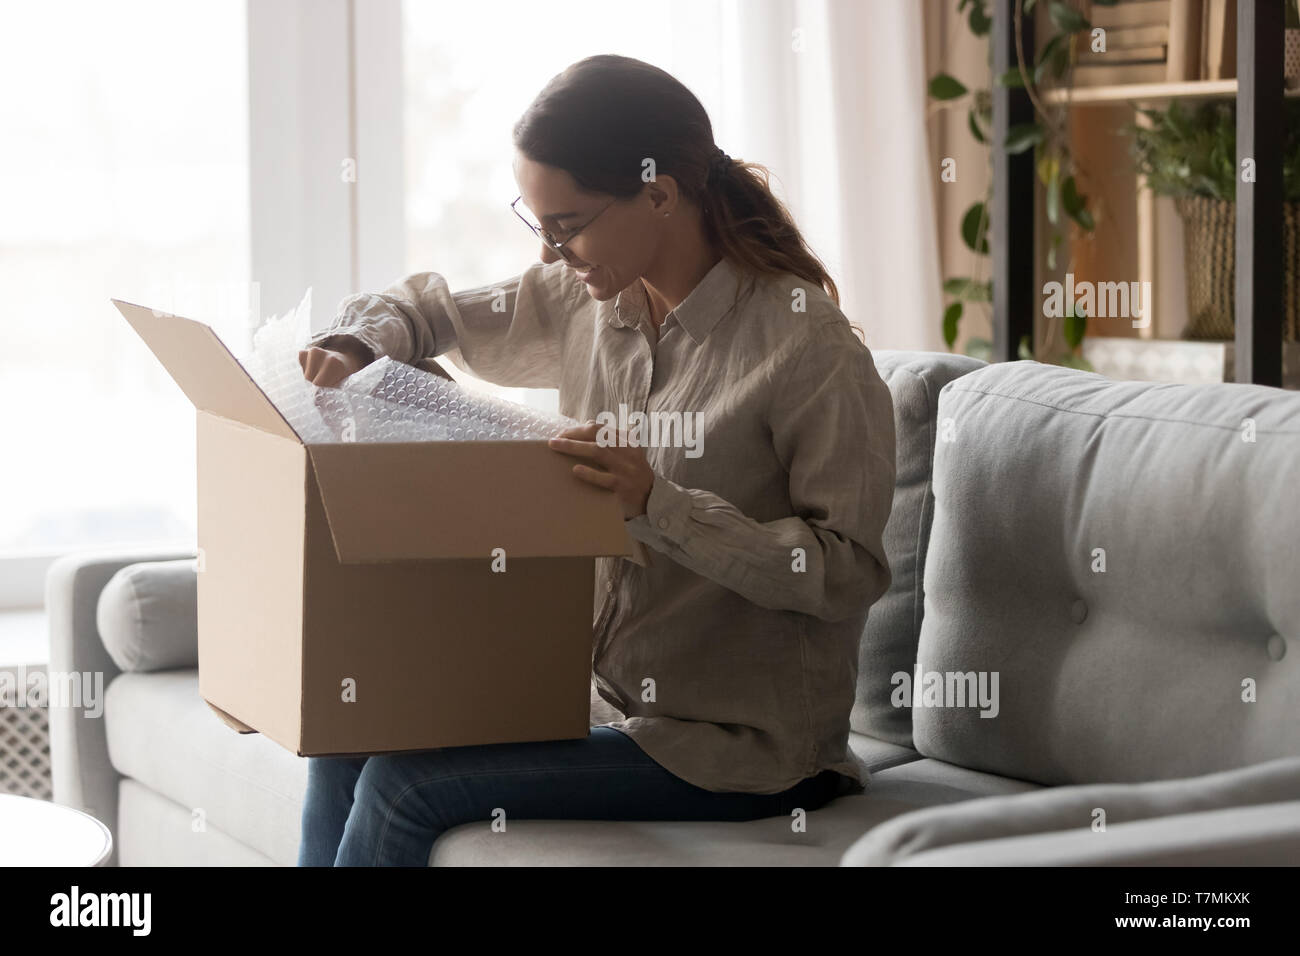 Woman holds big carton box on laps unpack delivered goods Stock Photo